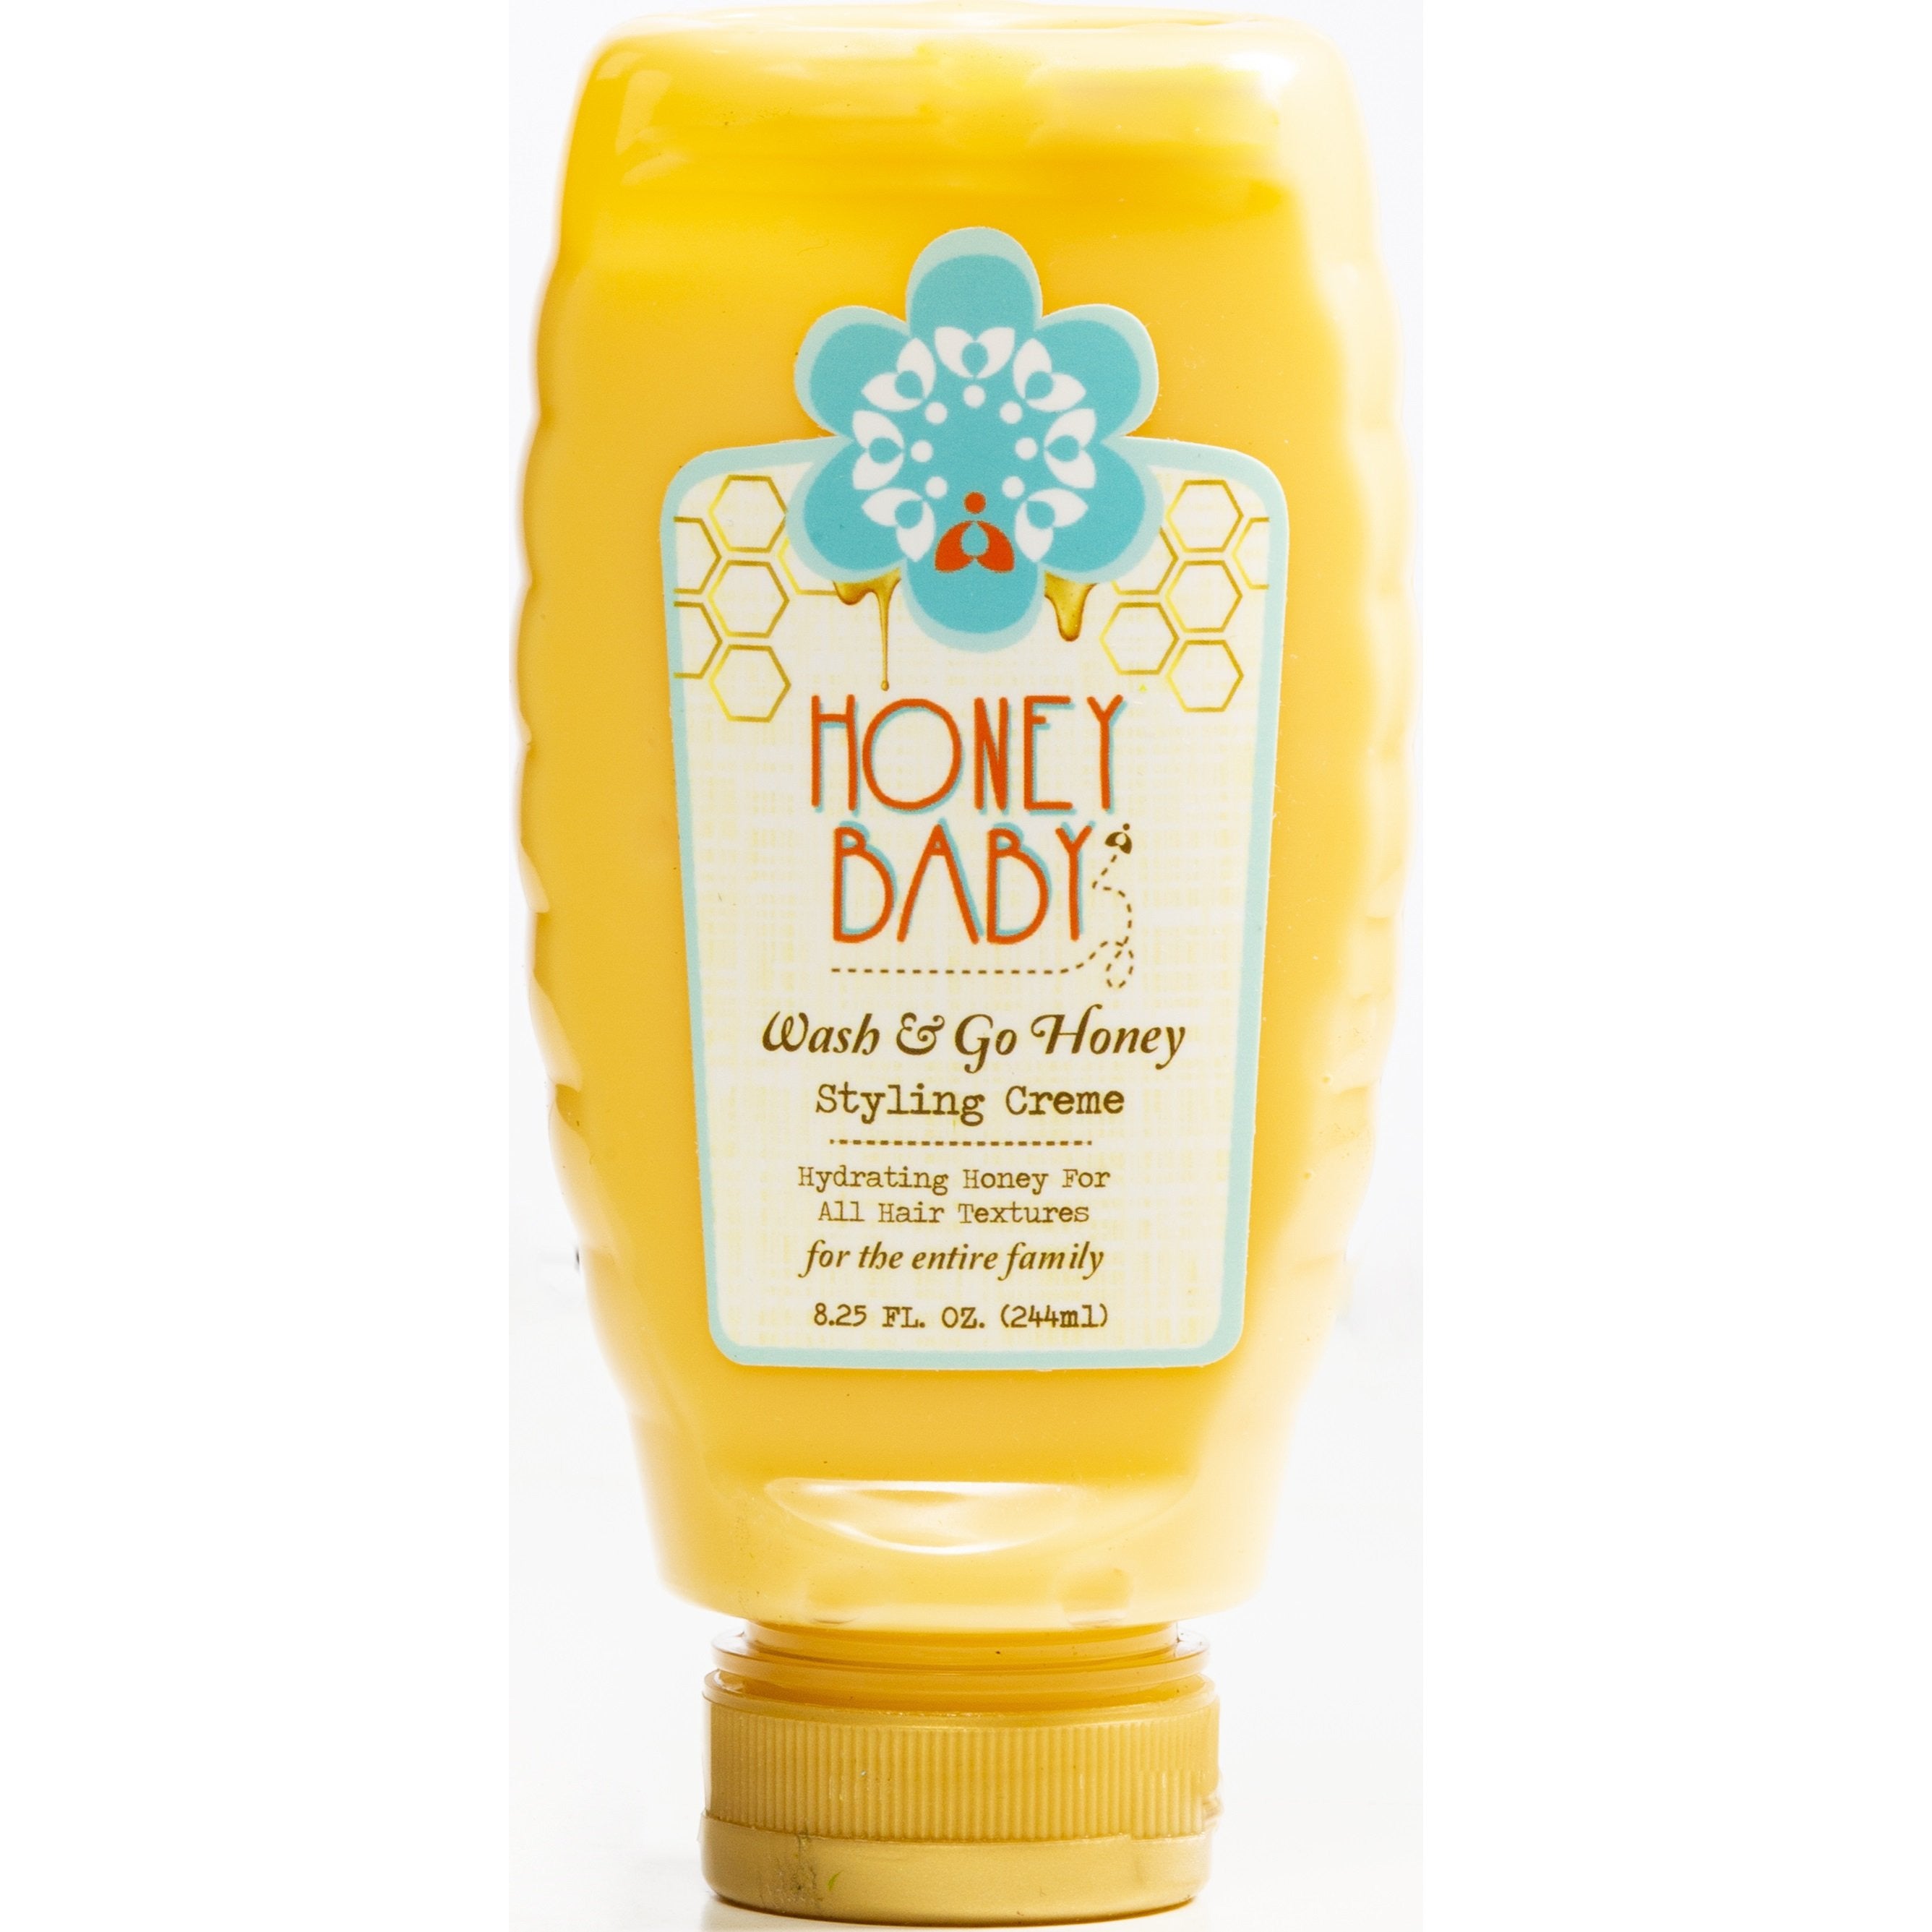 Honey Baby Wash & Go Honey - All In One Styling Crème - 8.25 Oz